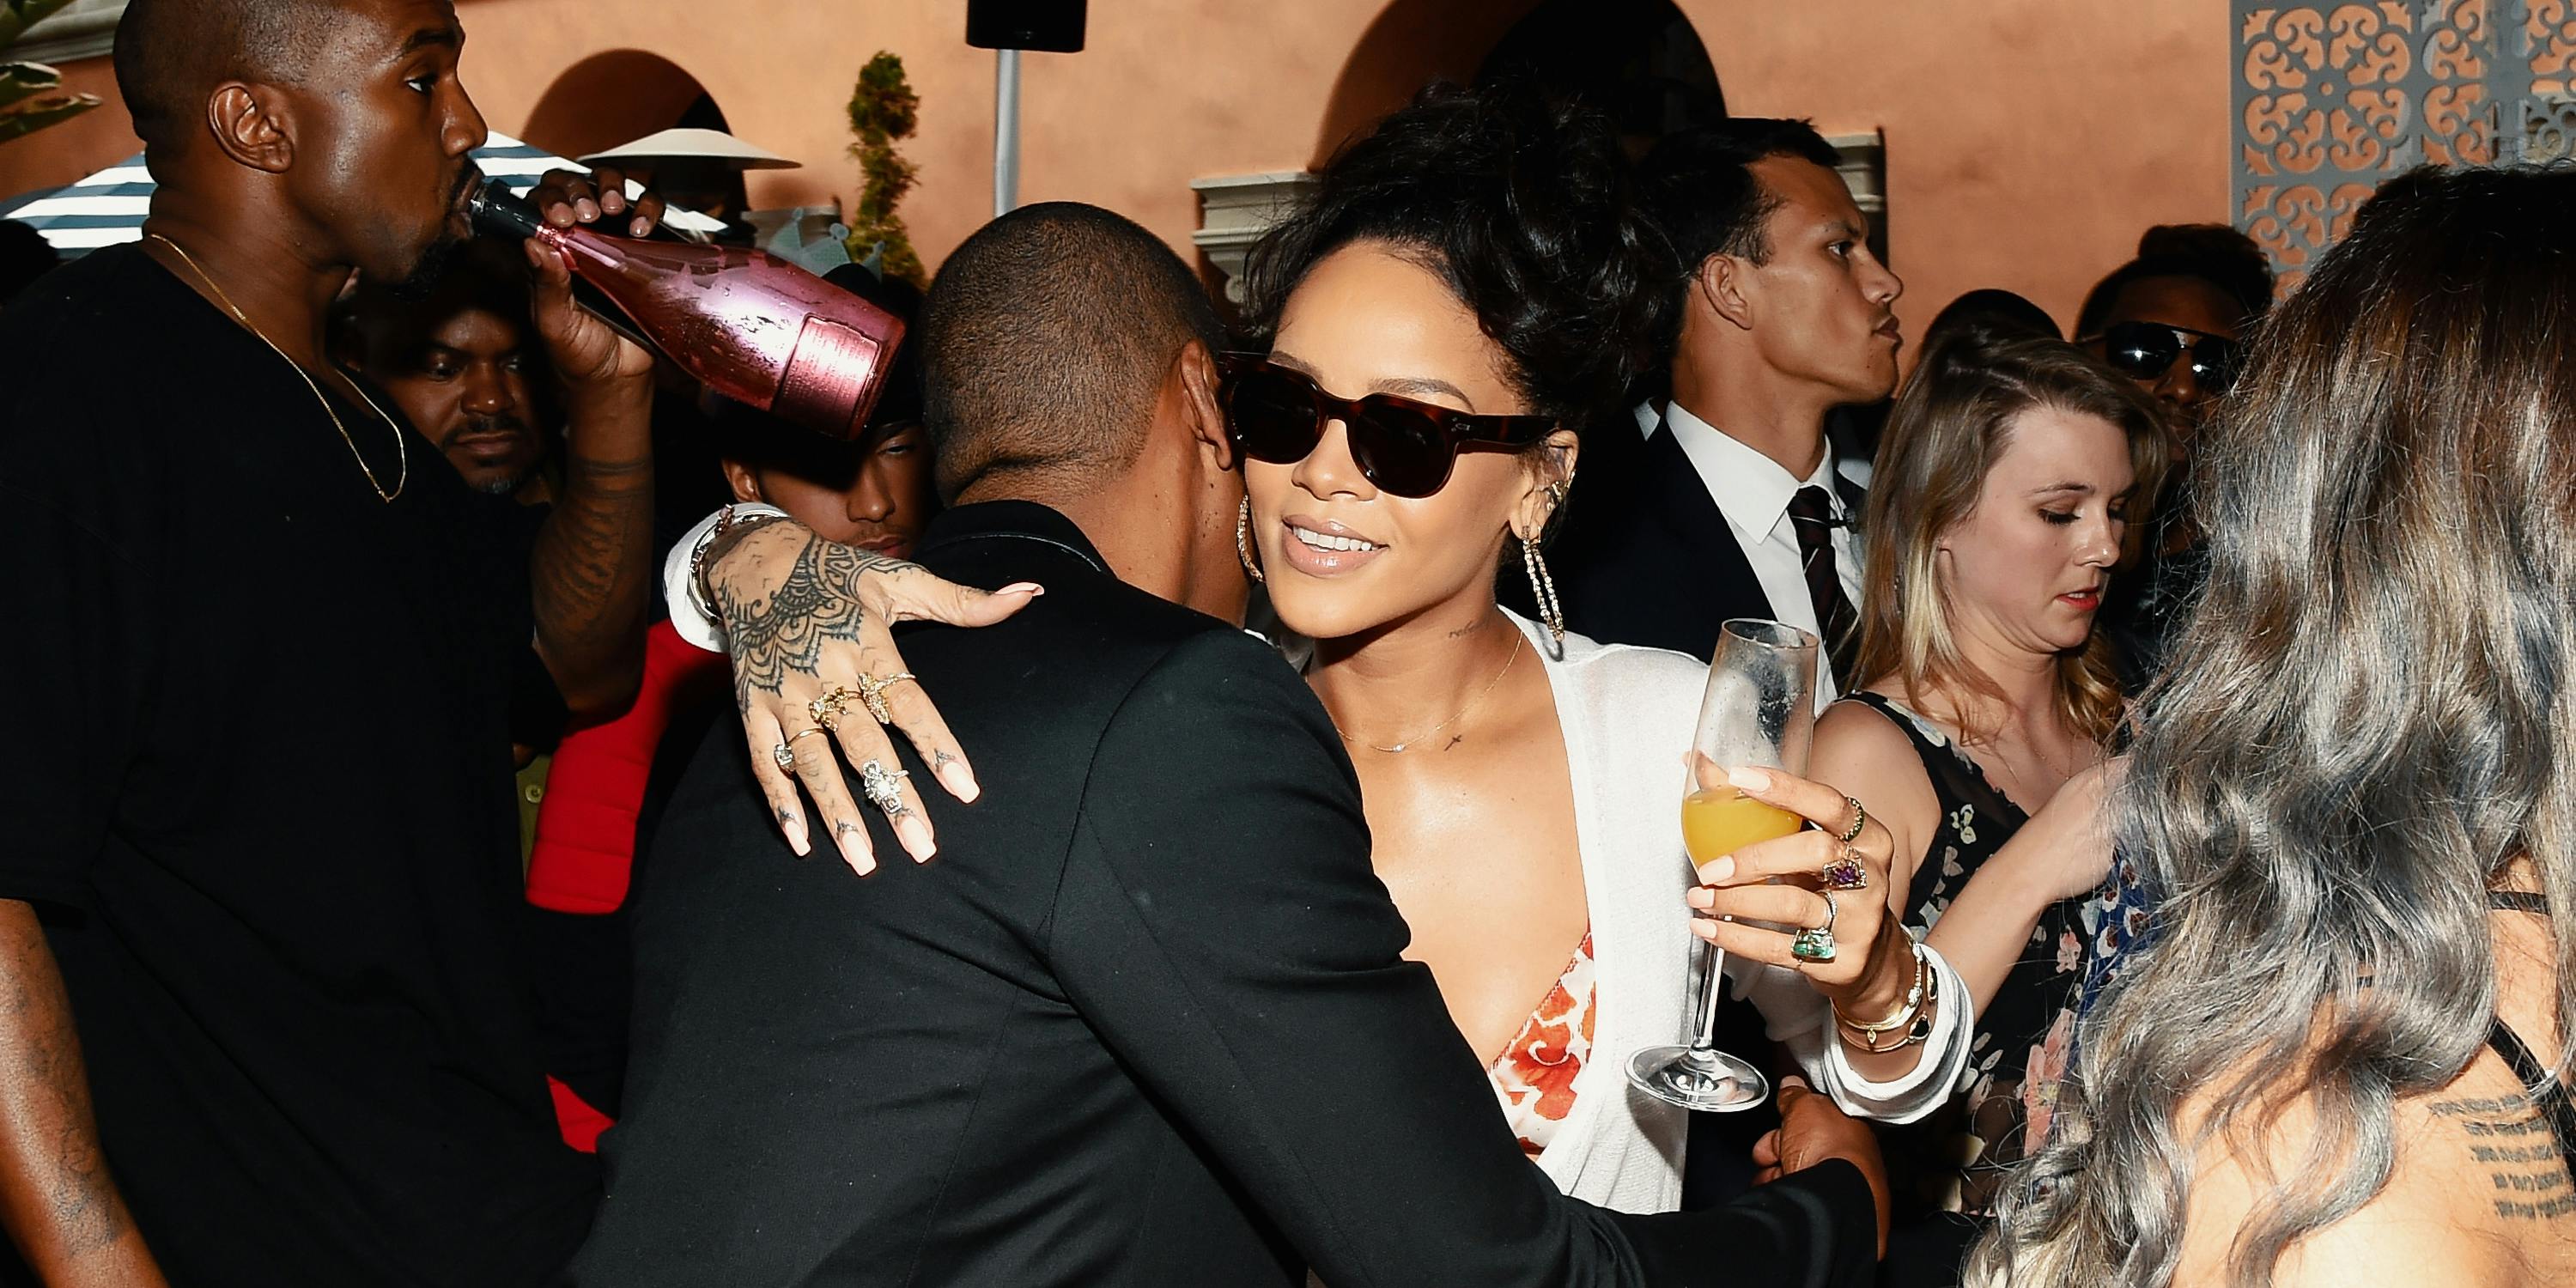 Rihanna Took Charlamange Tha God to a "Hood Spot" With "Mad Weed and Mad Tequila"